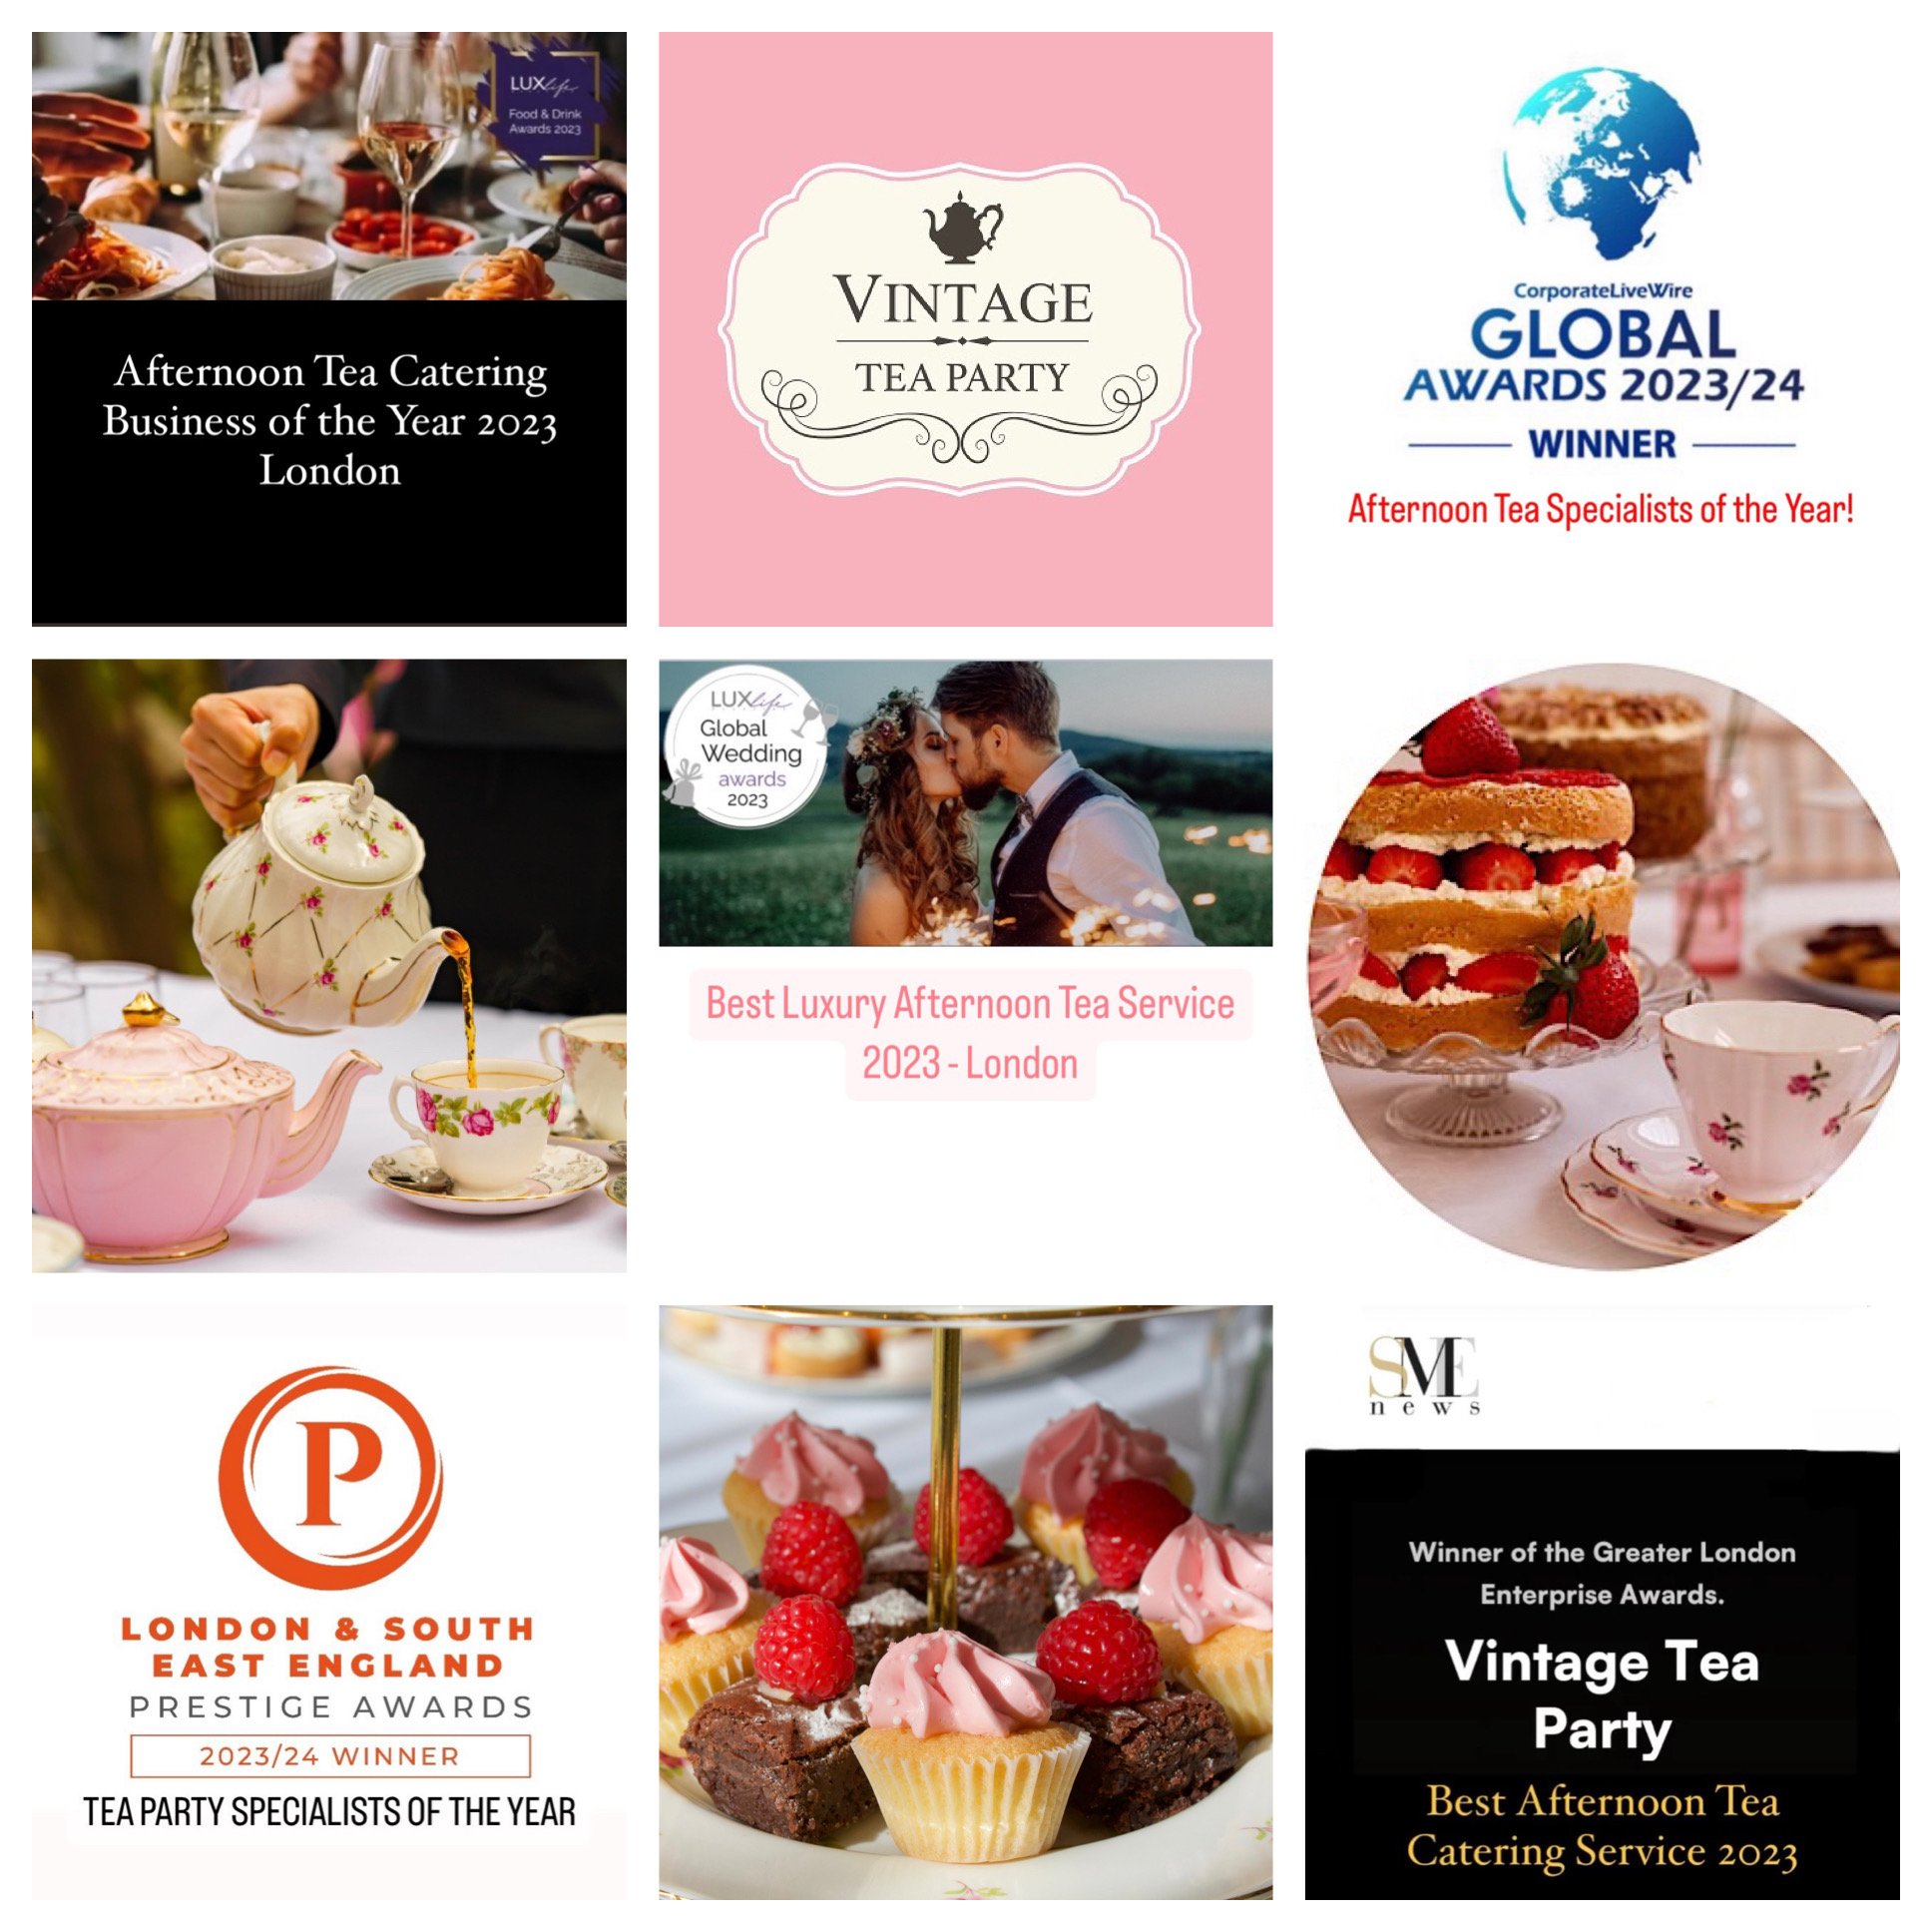 Lux life Global Wedding Award: Best luxury afternoon Tea Service 2023 - London, Lux life Food and Drinks Awards: Afternoon Tea Catering Business of the year 2023- London, London and South East England Prestige Awards 2023: Tea Party Specialist of the Year, Greater London Enterprise Awards: Best Afternoon Tea Catering Service 2023, Corporate Live Wire Global Awards 2023: Afternoon Tea Specialists of the Year